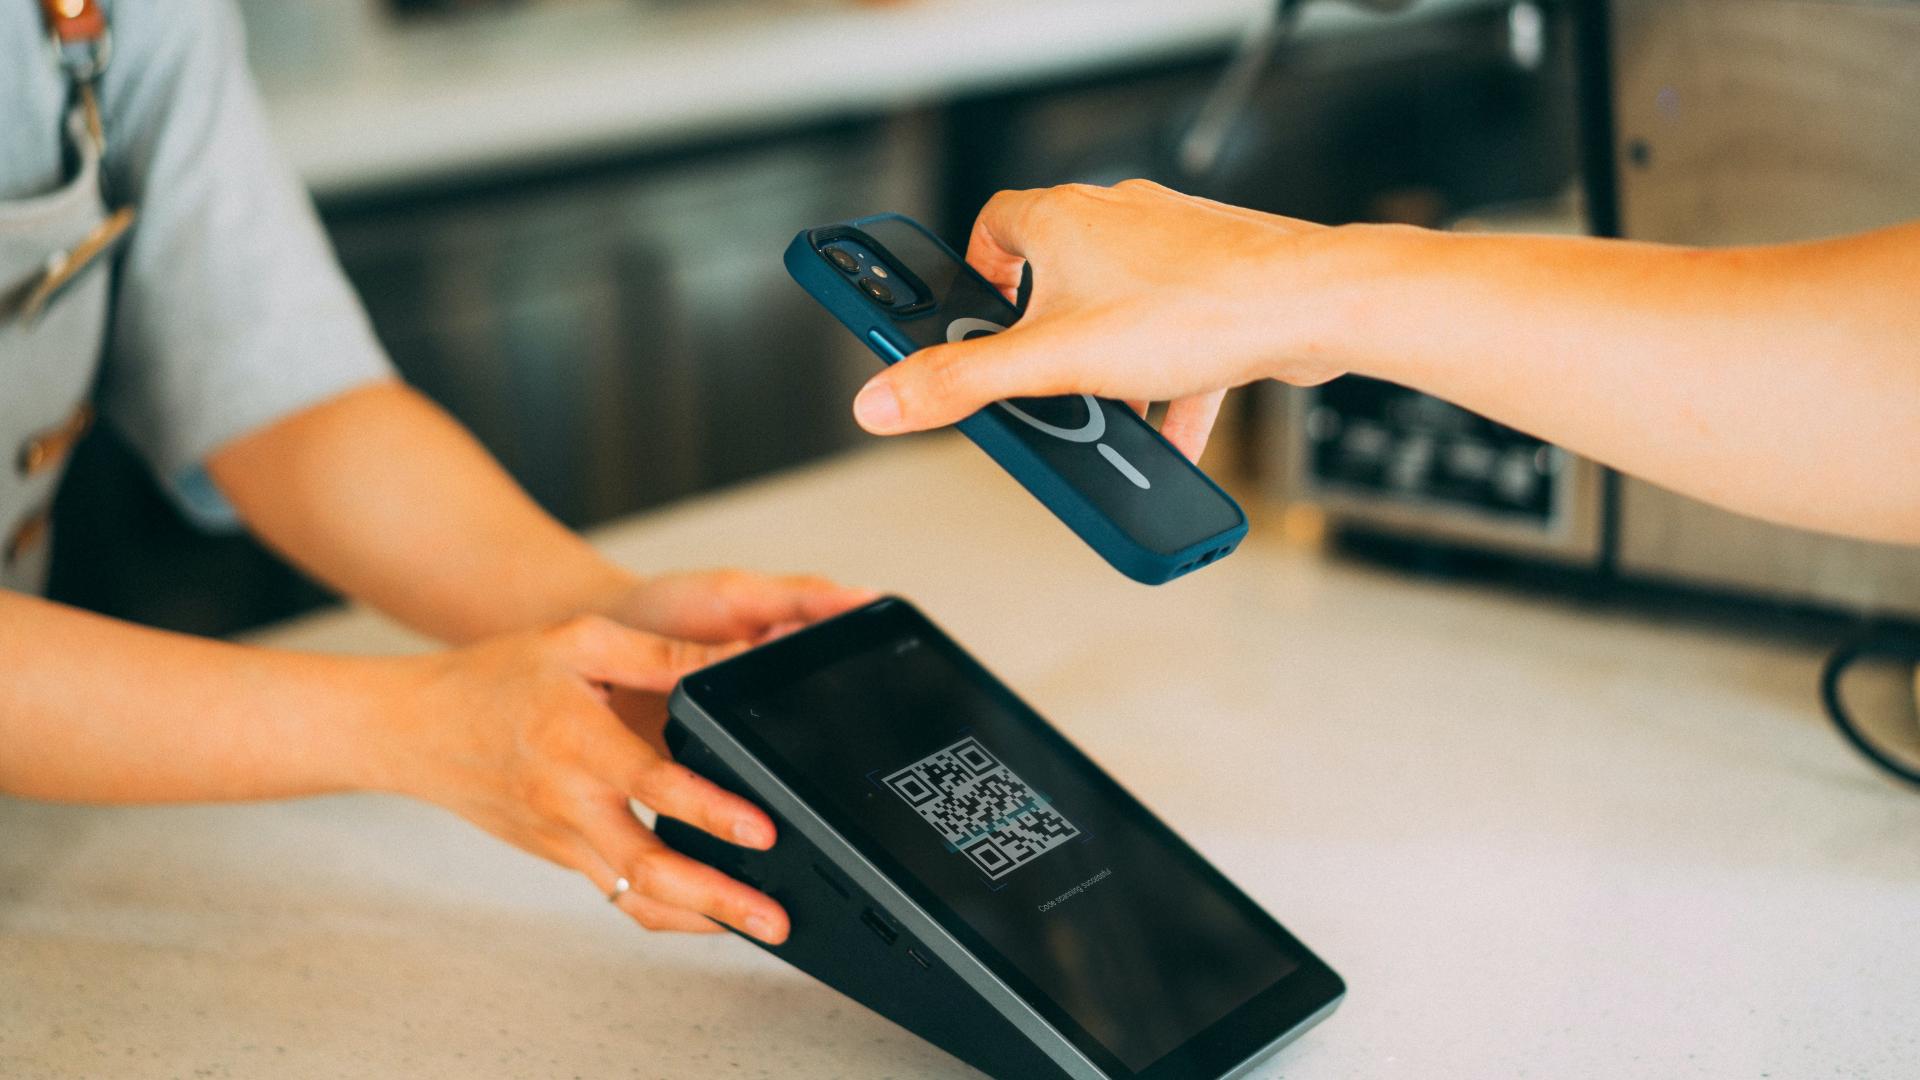 point of sale system and card reader with QR code payment option for mobile payments